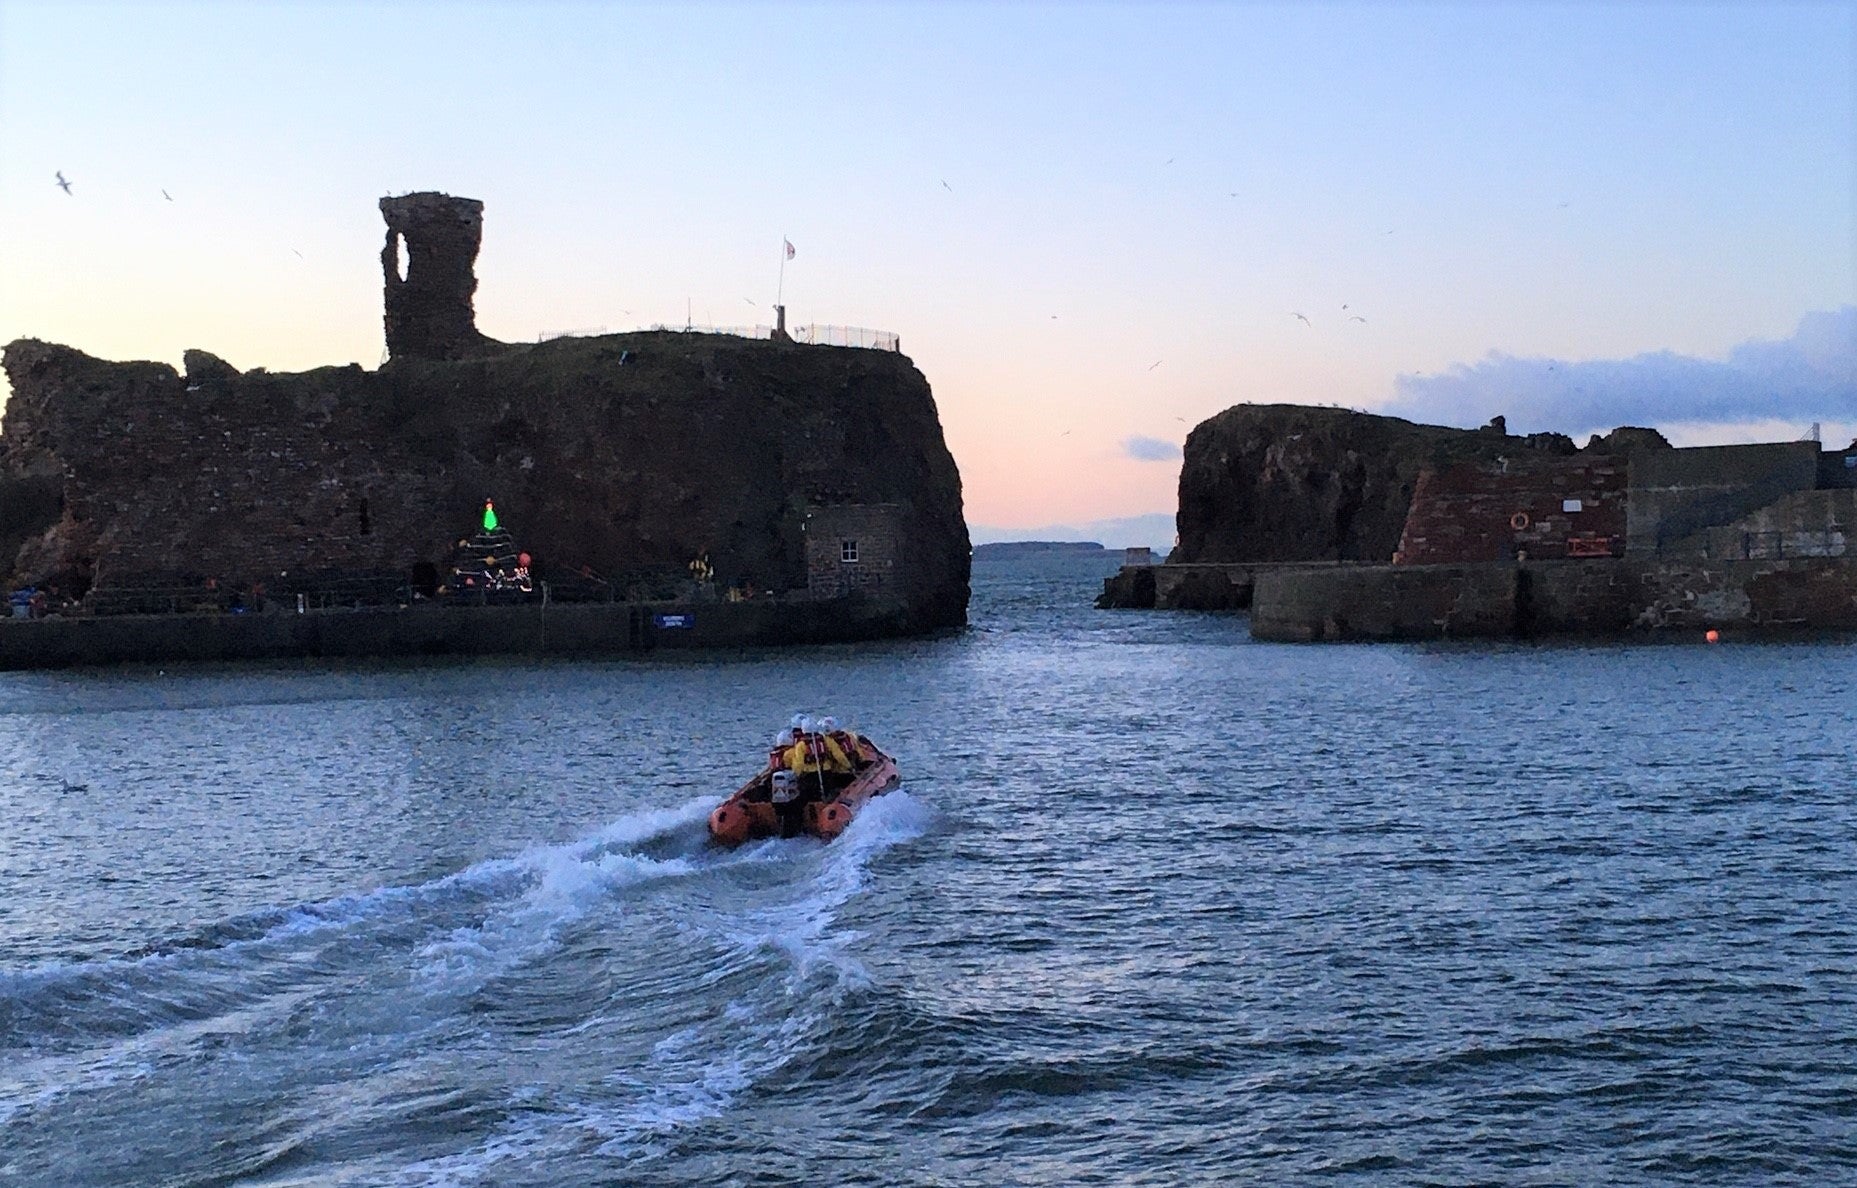 Dunbar’s inshore lifeboat crew heads out to help with the injured casualty(Douglas Wright/RNLI)